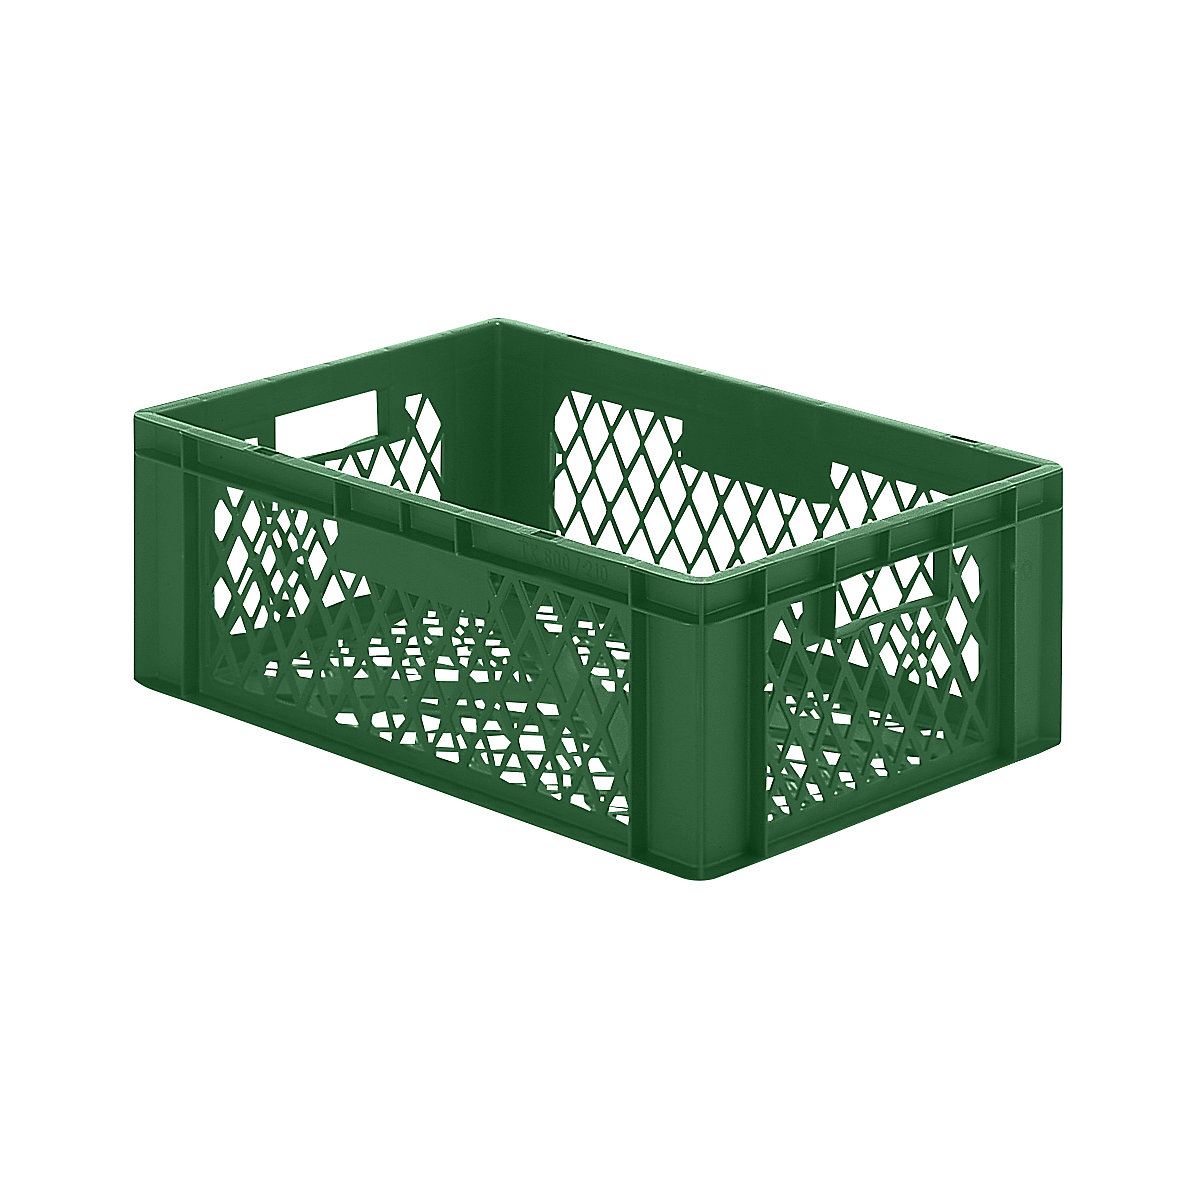 Euro stacking container, perforated walls and base, LxWxH 600 x 400 x 210 mm, green, pack of 5